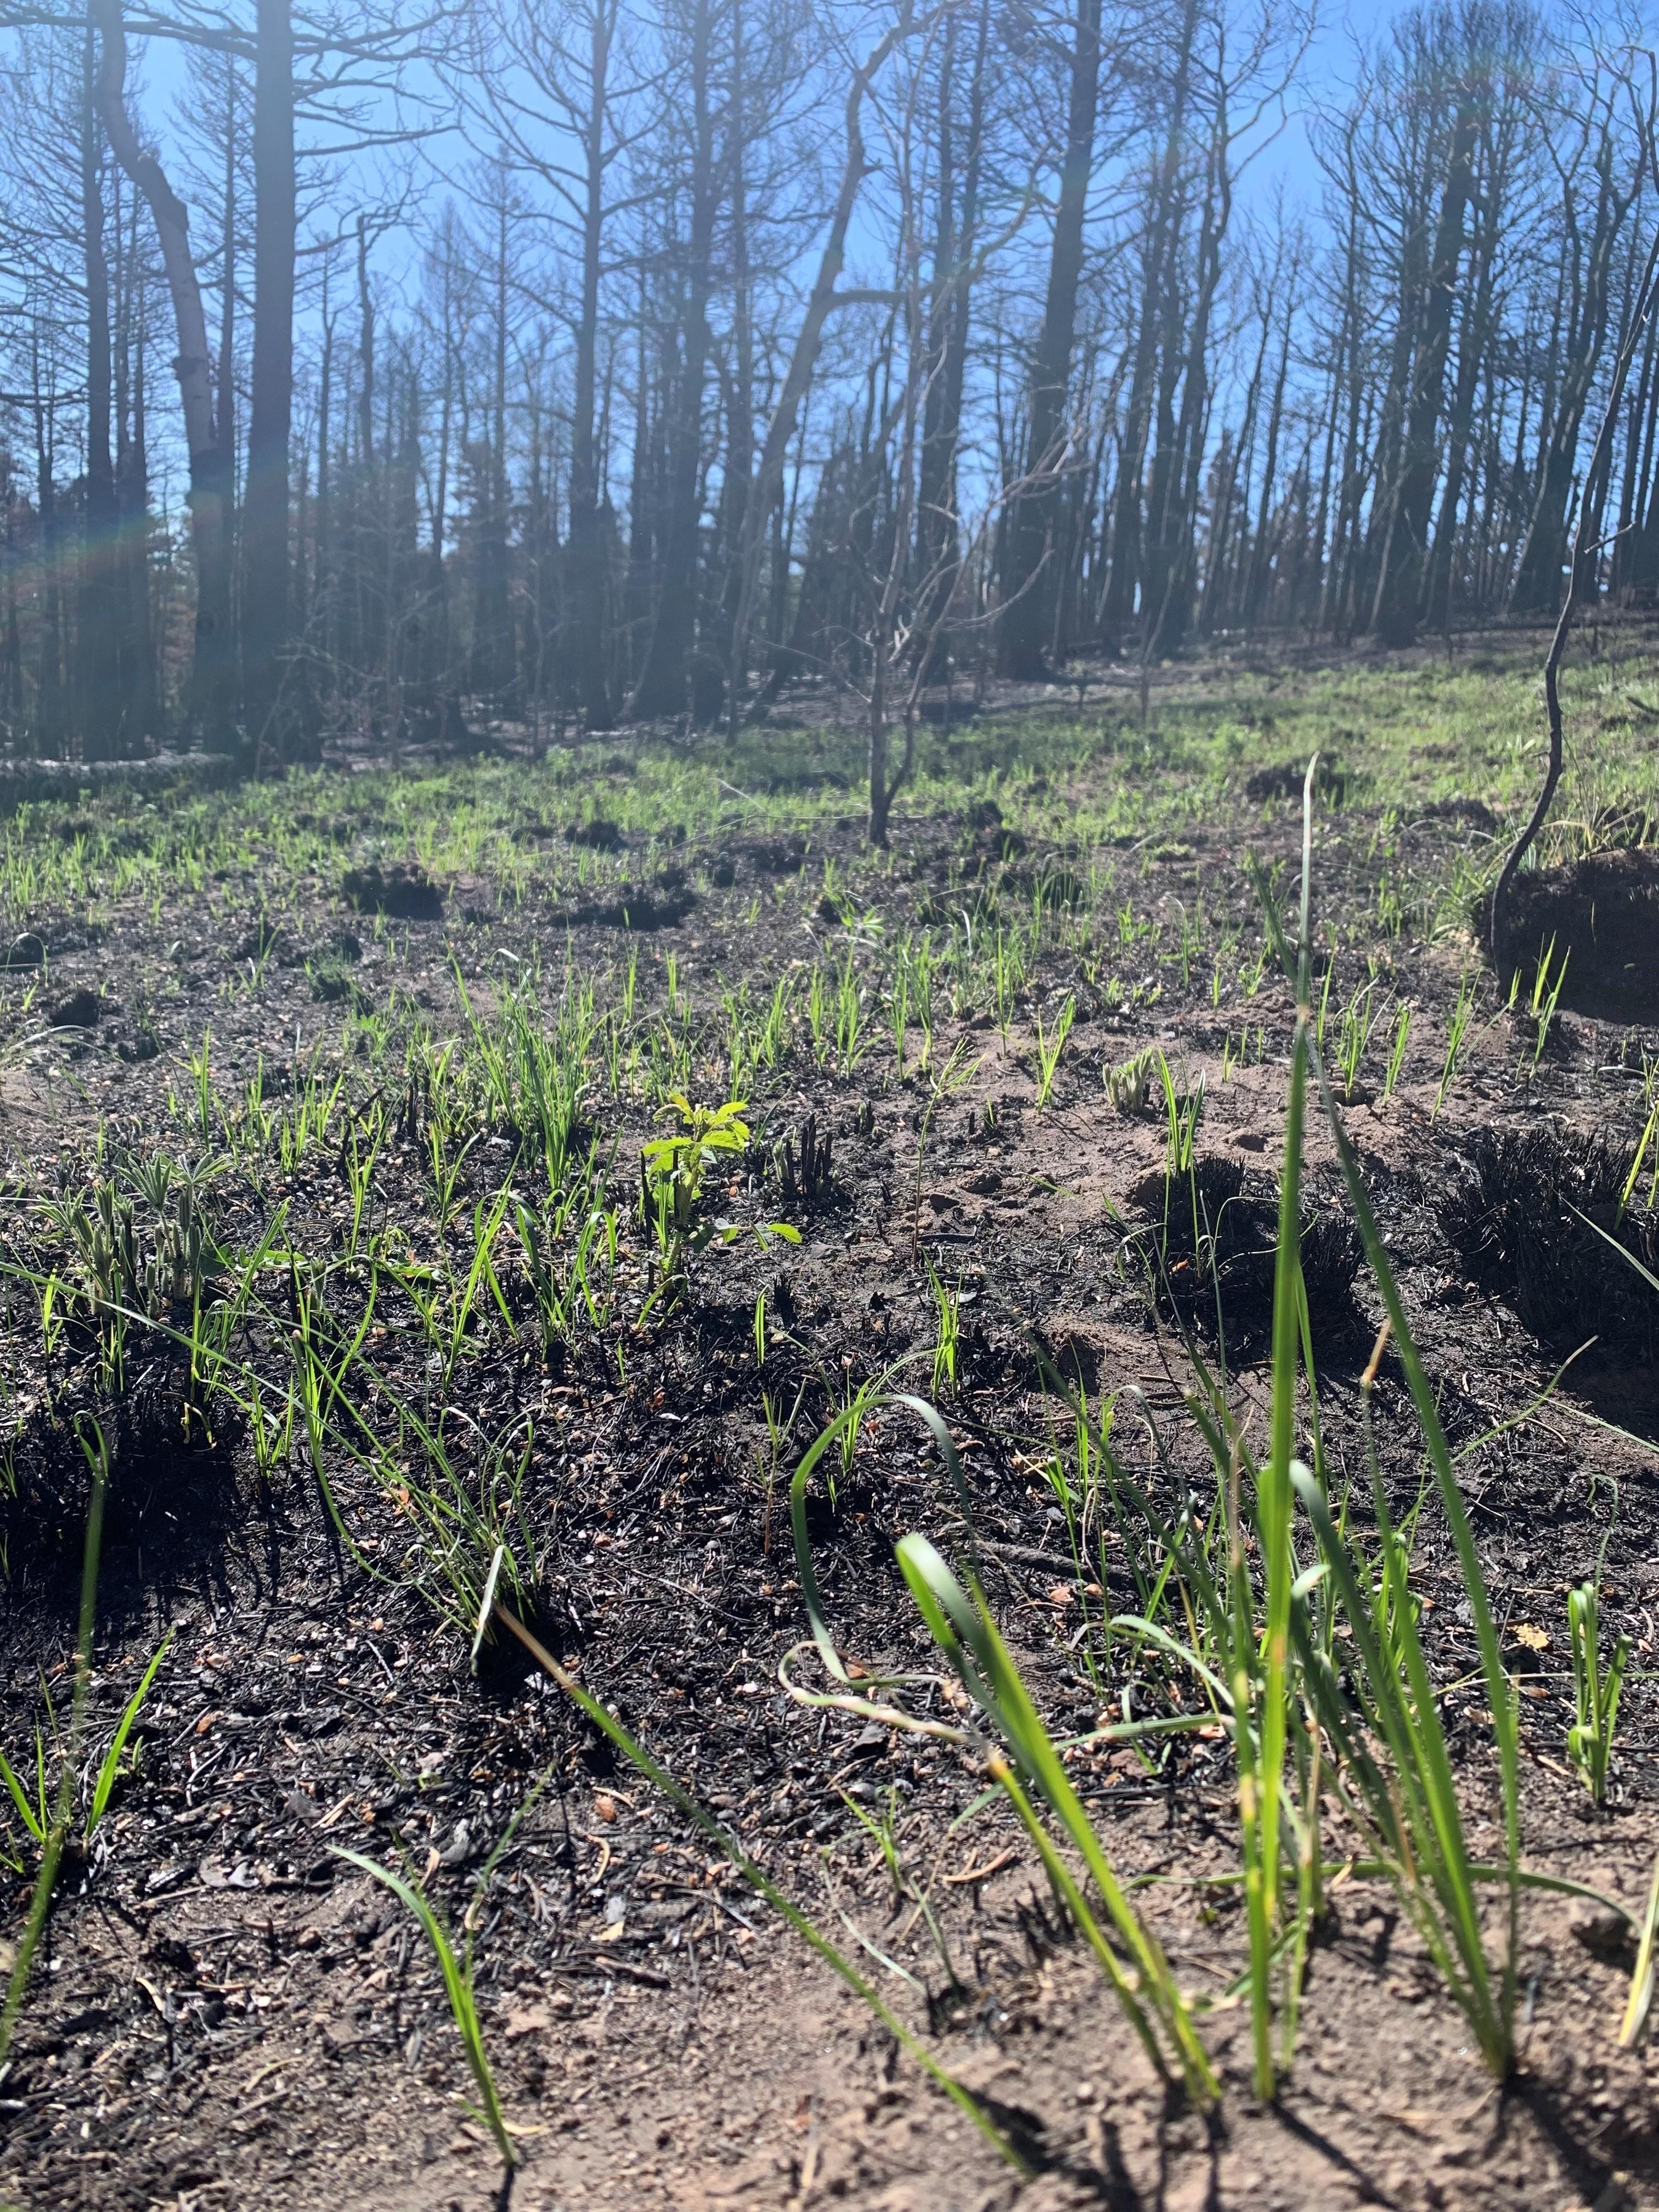 Small green grass stems grow out of a blackened forest floor. Taller burned trees are in the background.